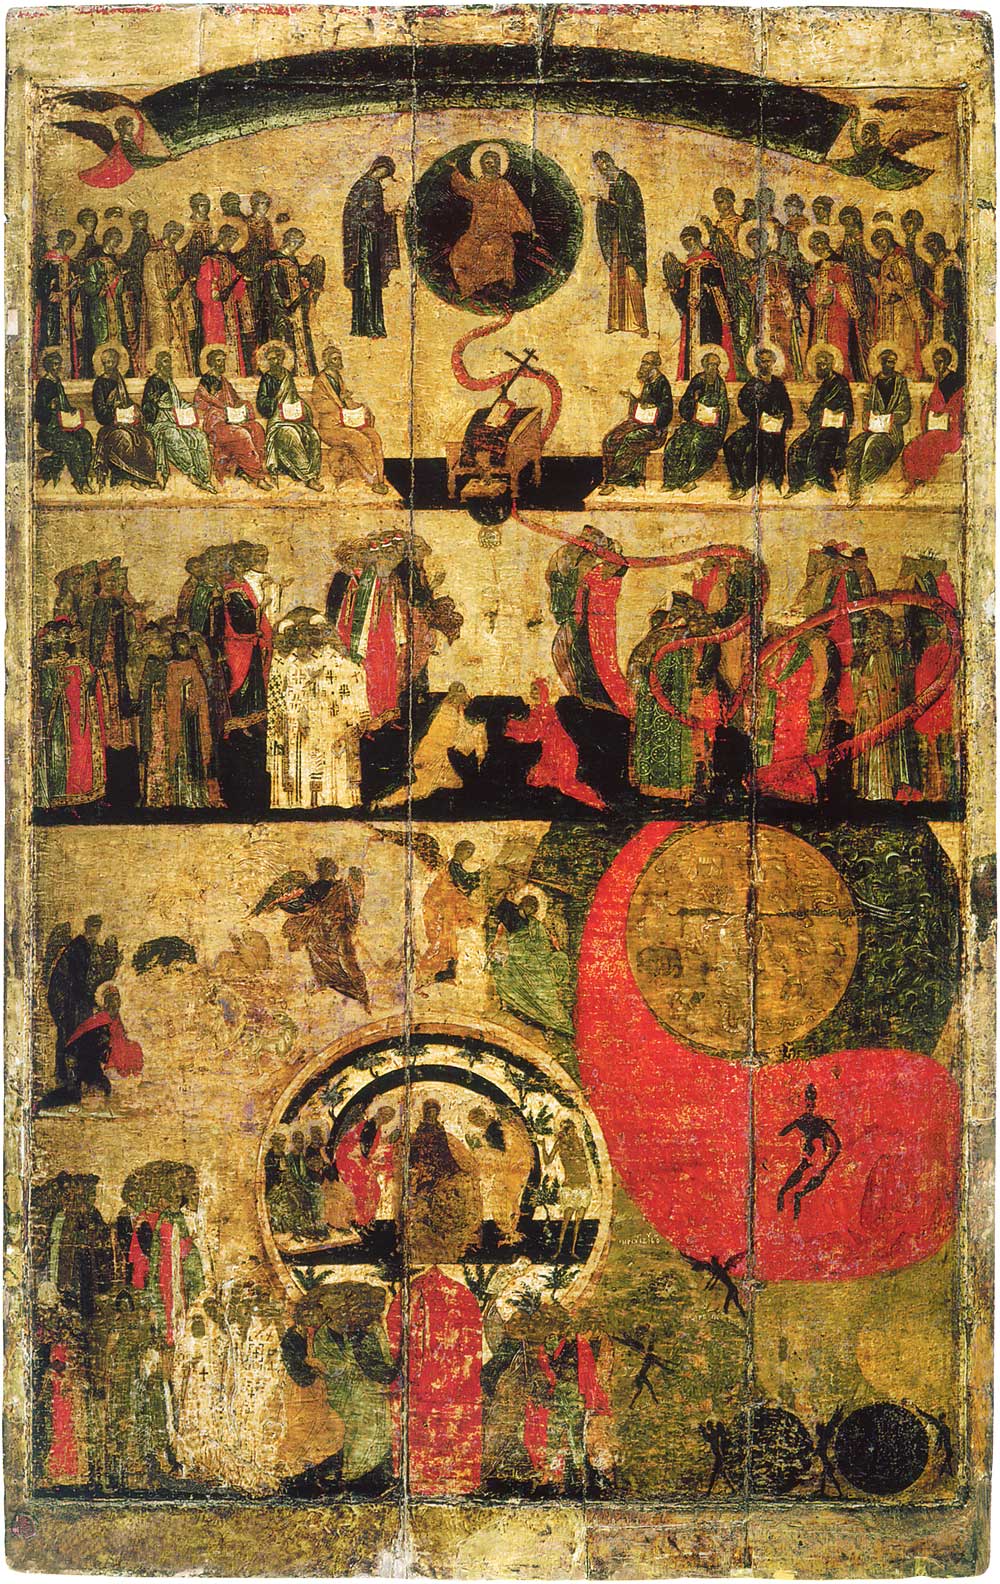 The Last Judgement. Assumption Cathedral of the Moscow Kremlin. Late XIV - early XV centuries 